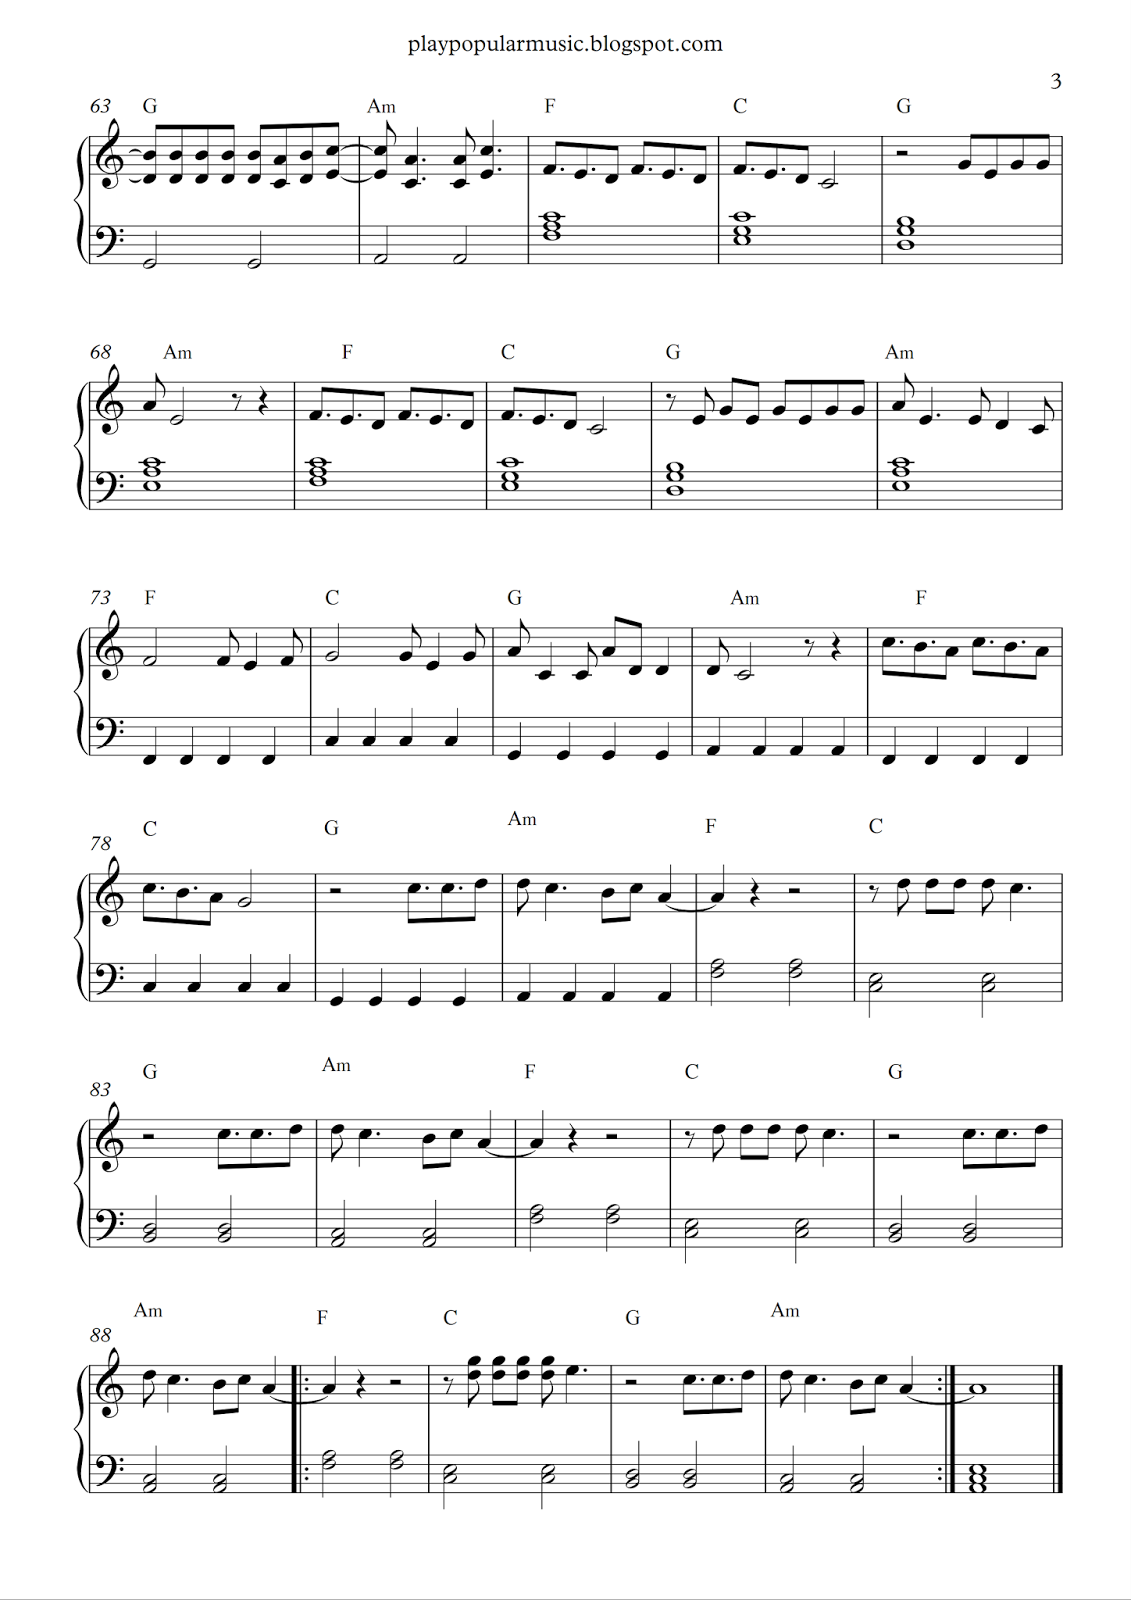 i don t need a roof sheet music pdf